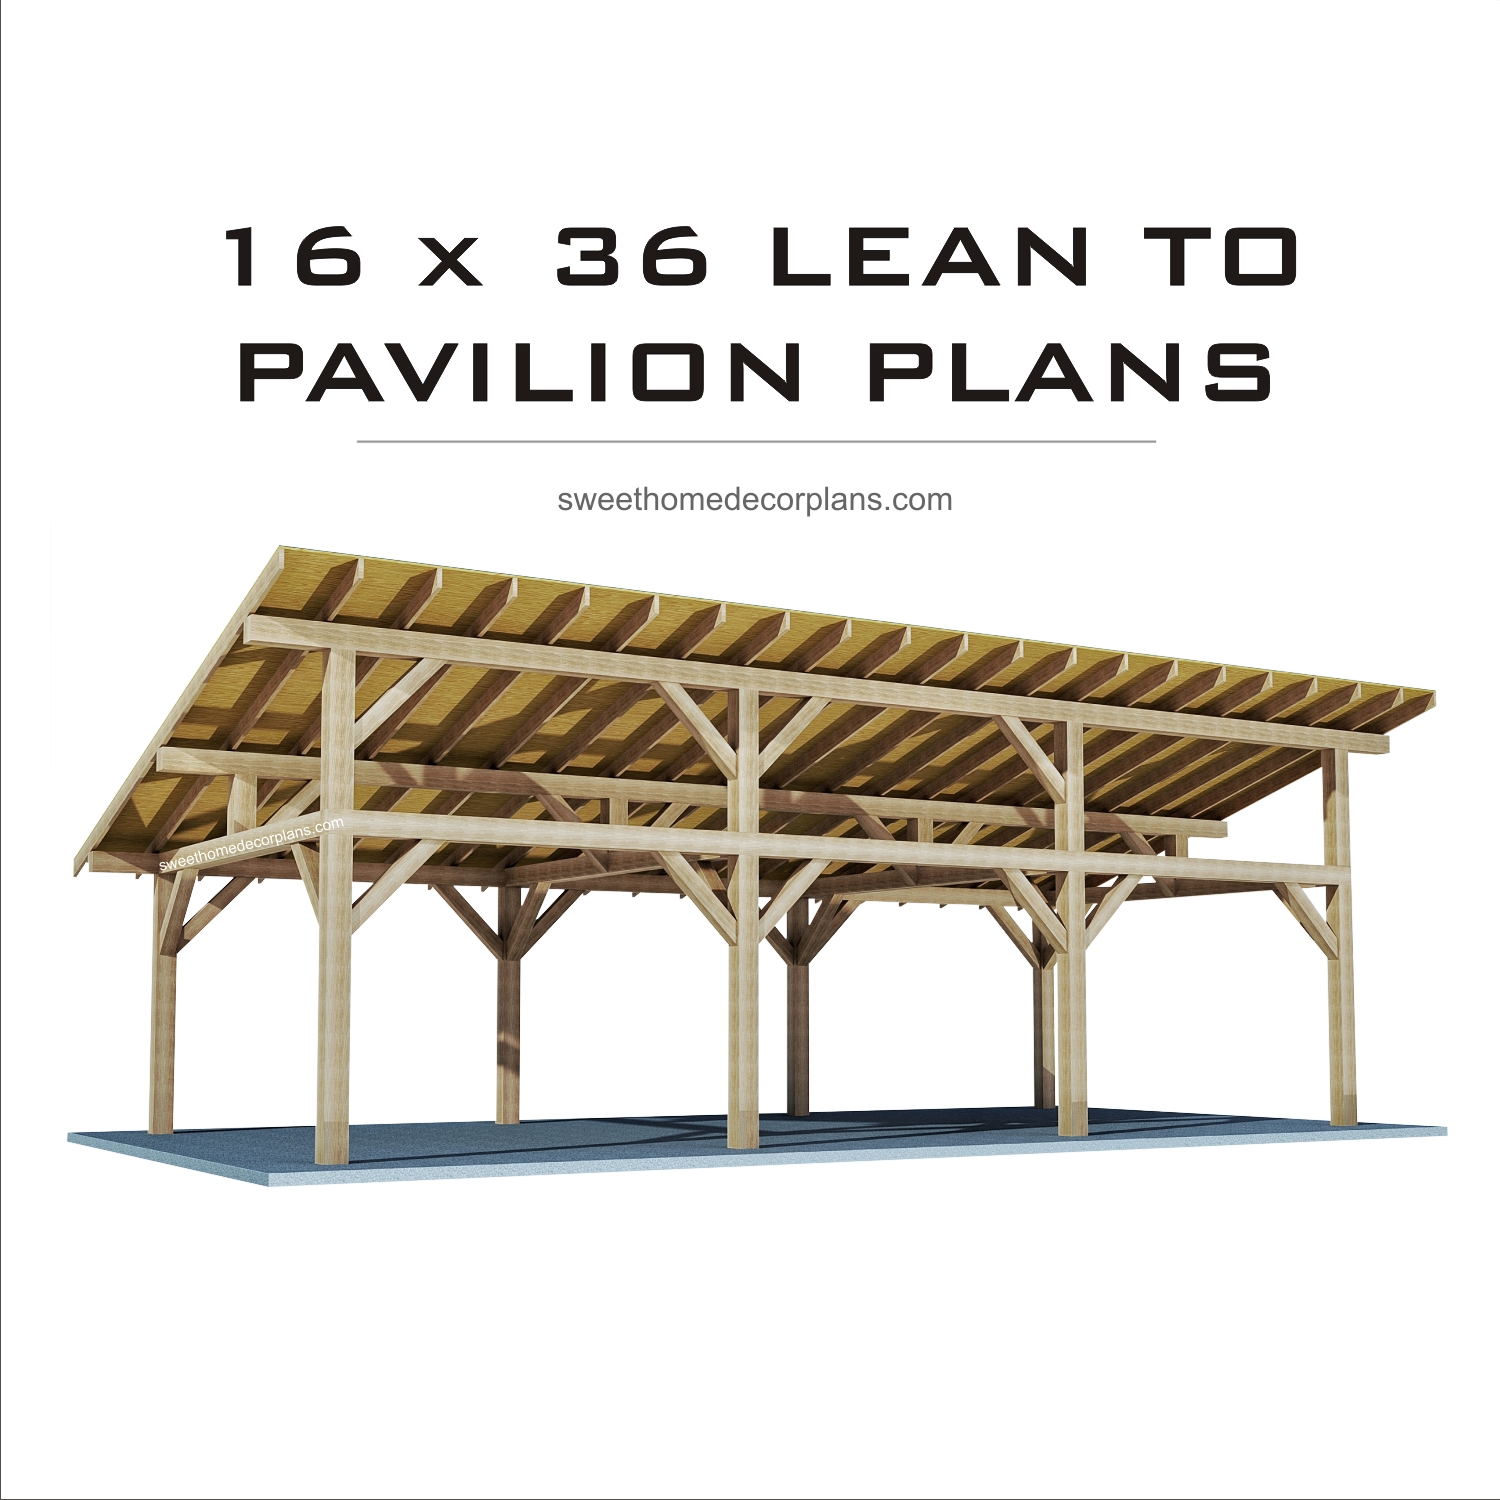 Diy-wooden-16-x-36-lean-to-pavilion-plans-in-pdf-for-backyard